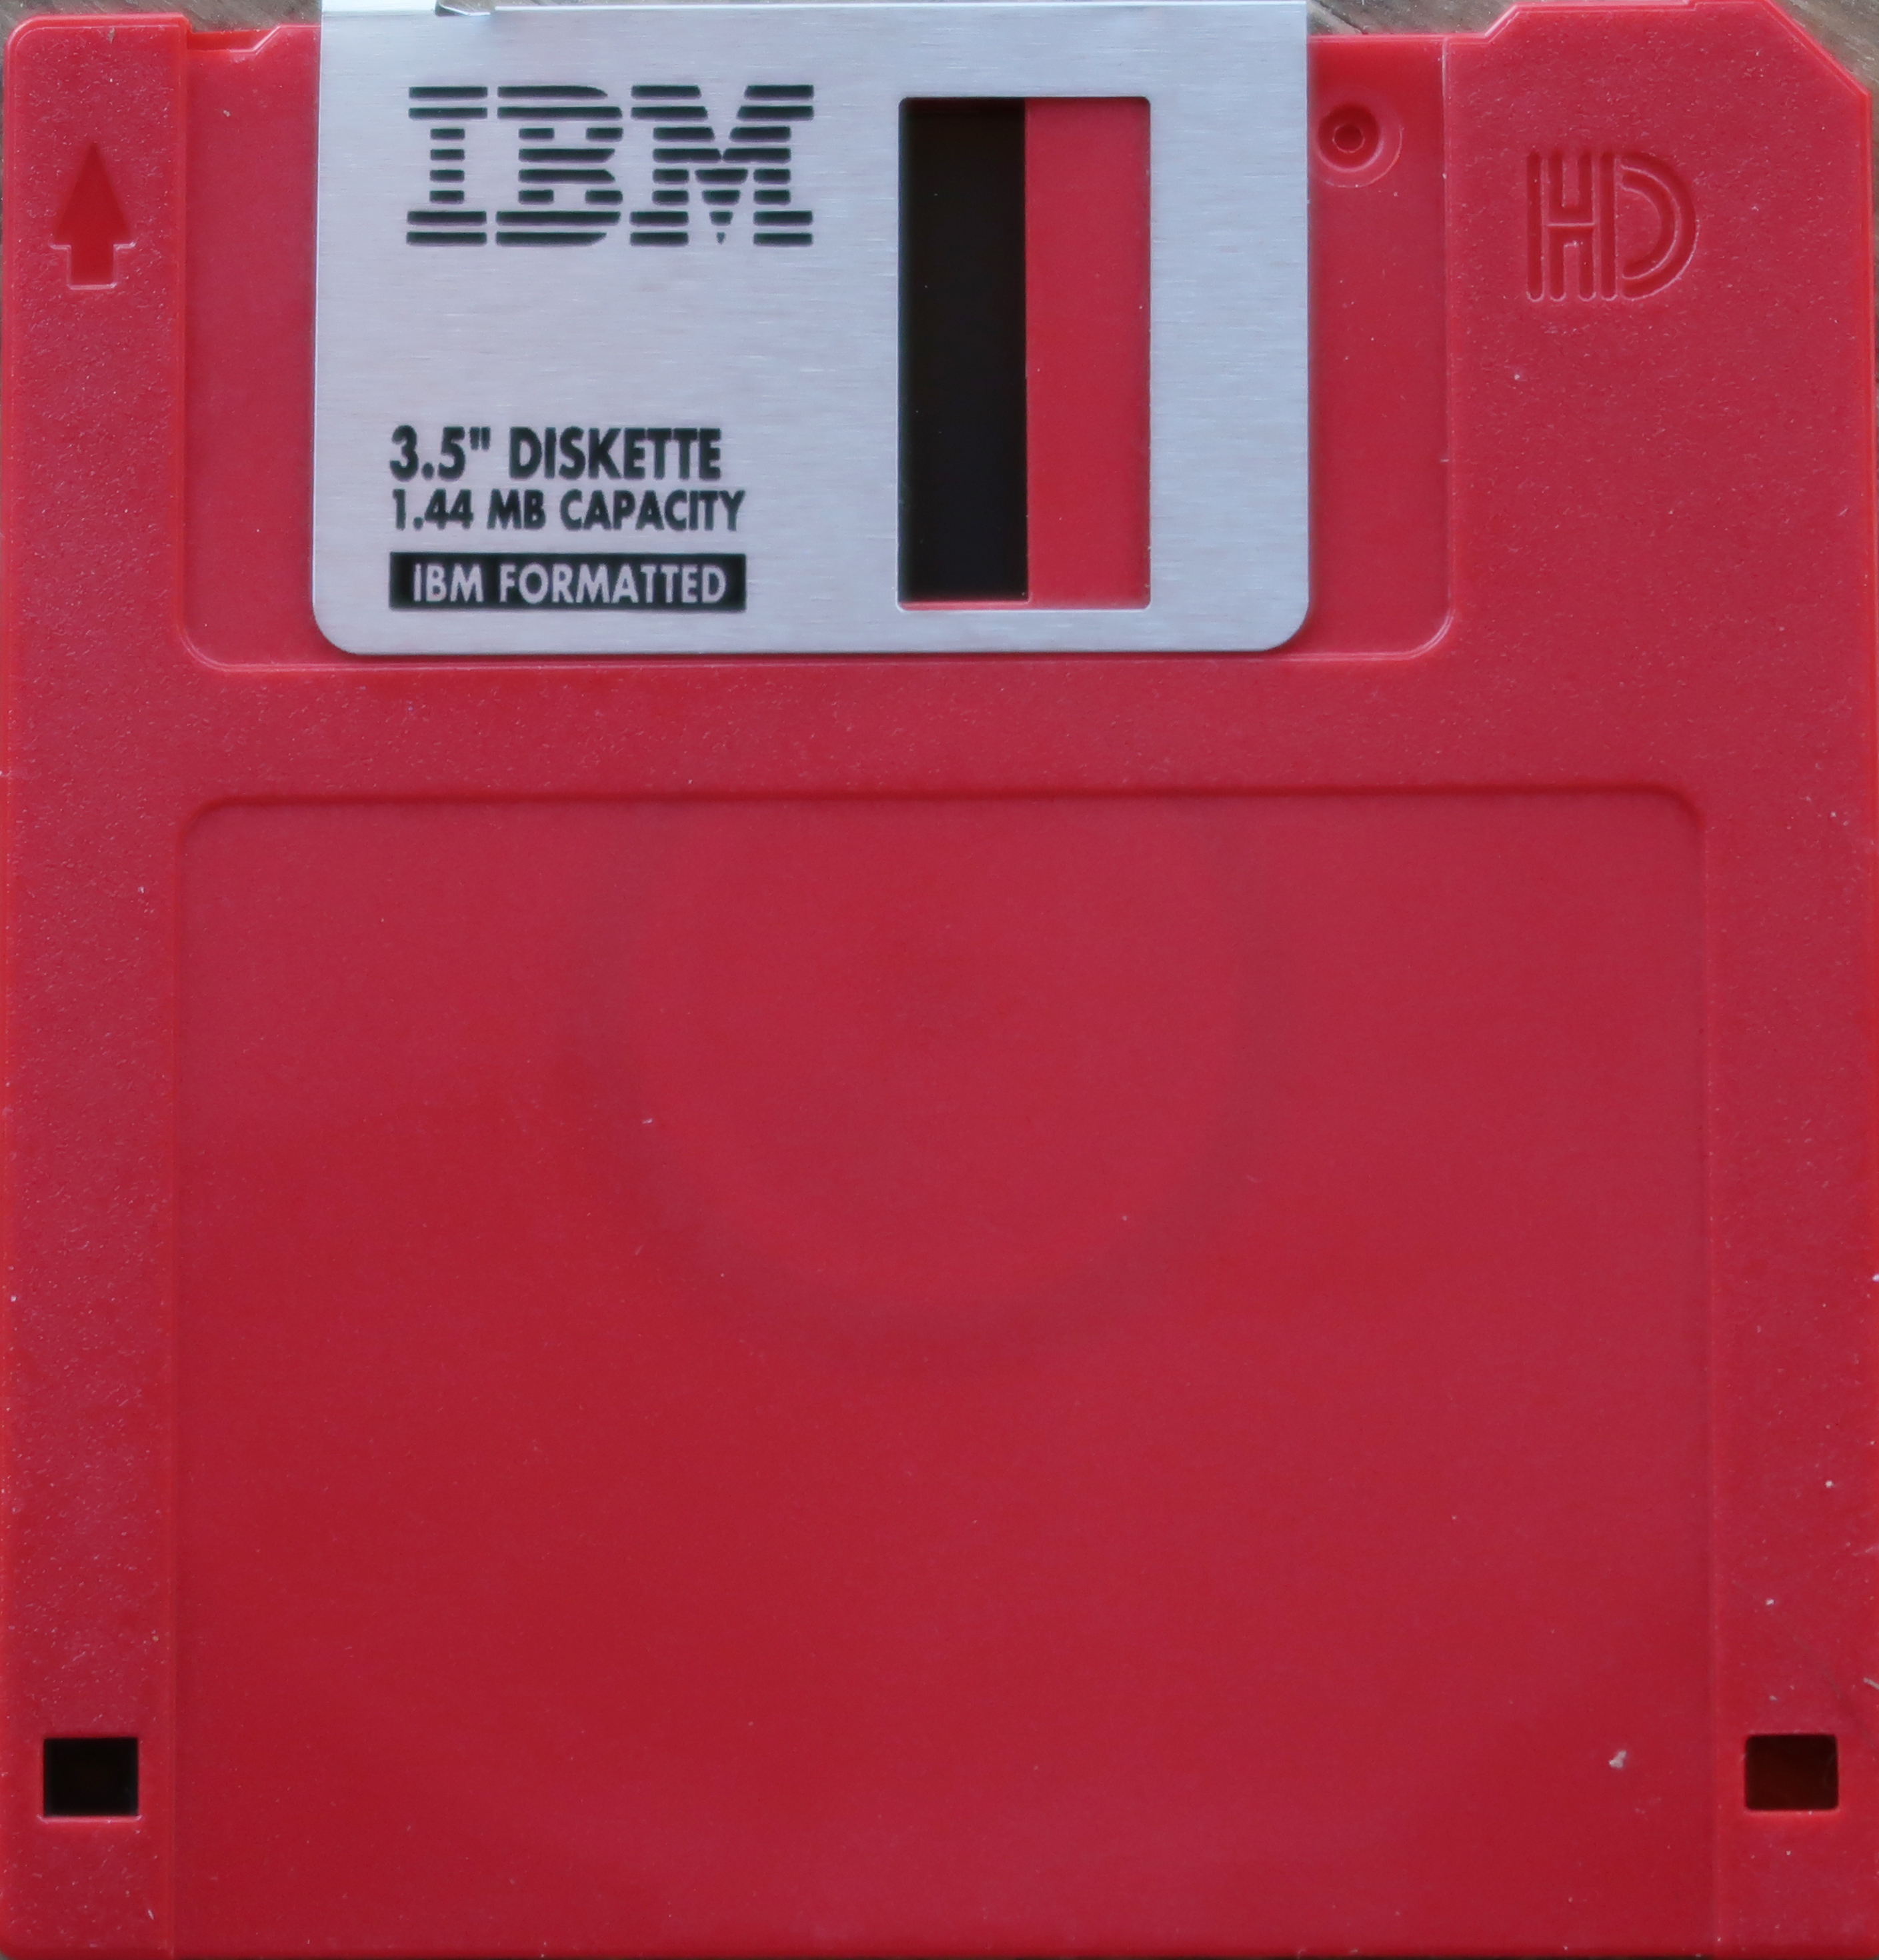 Floppy disc, why history matters.